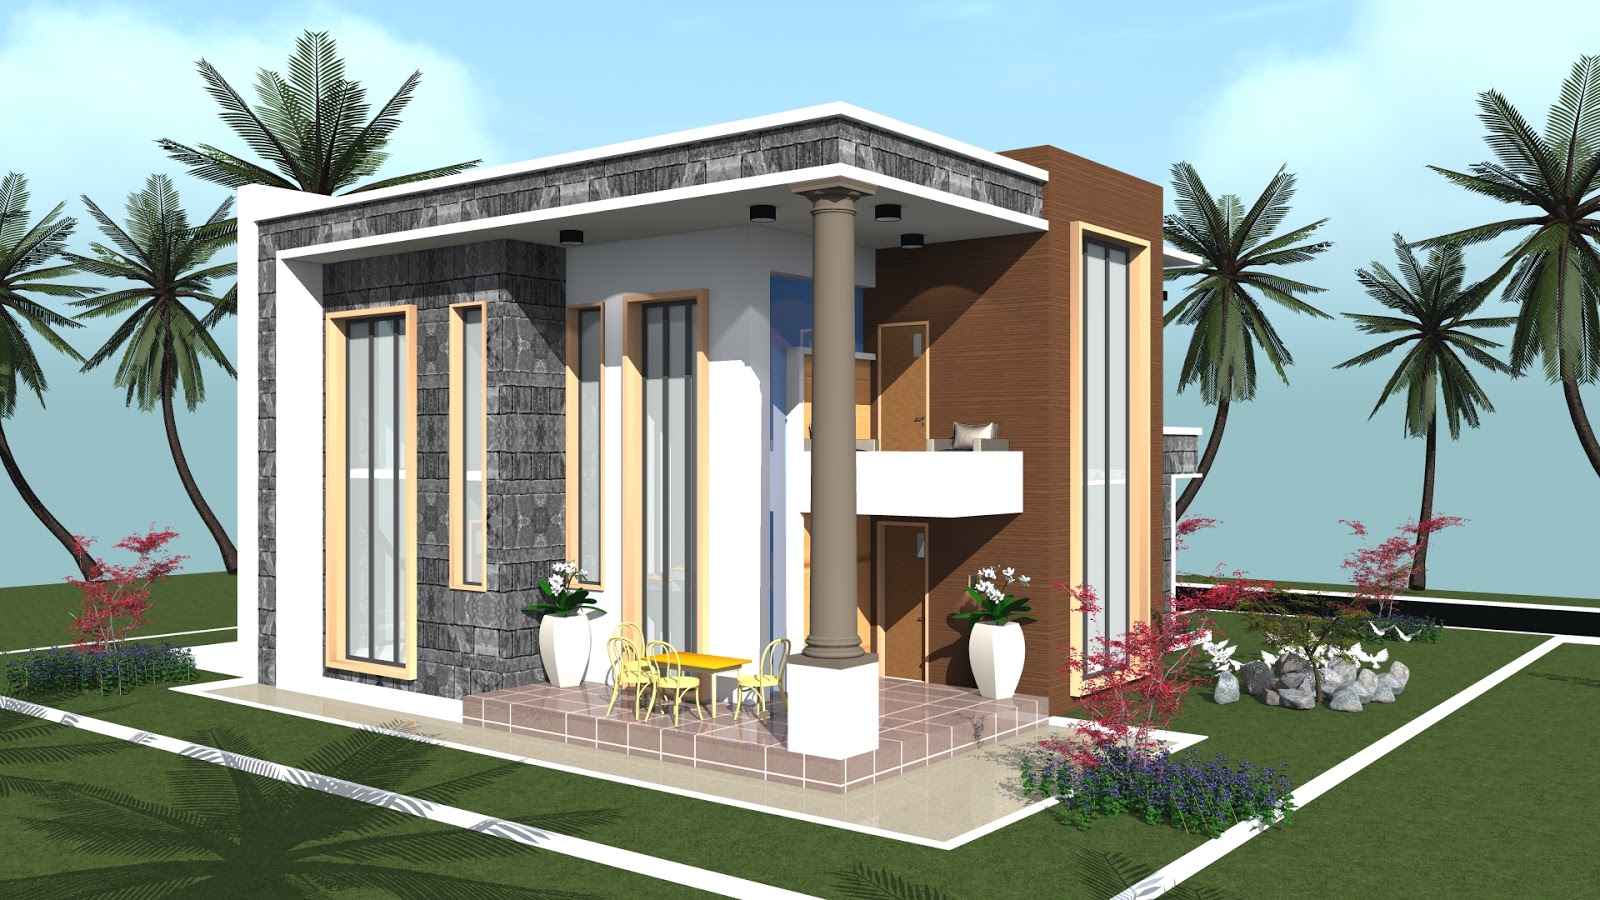 4 Bed Rooms House Plan (ID MA-071)